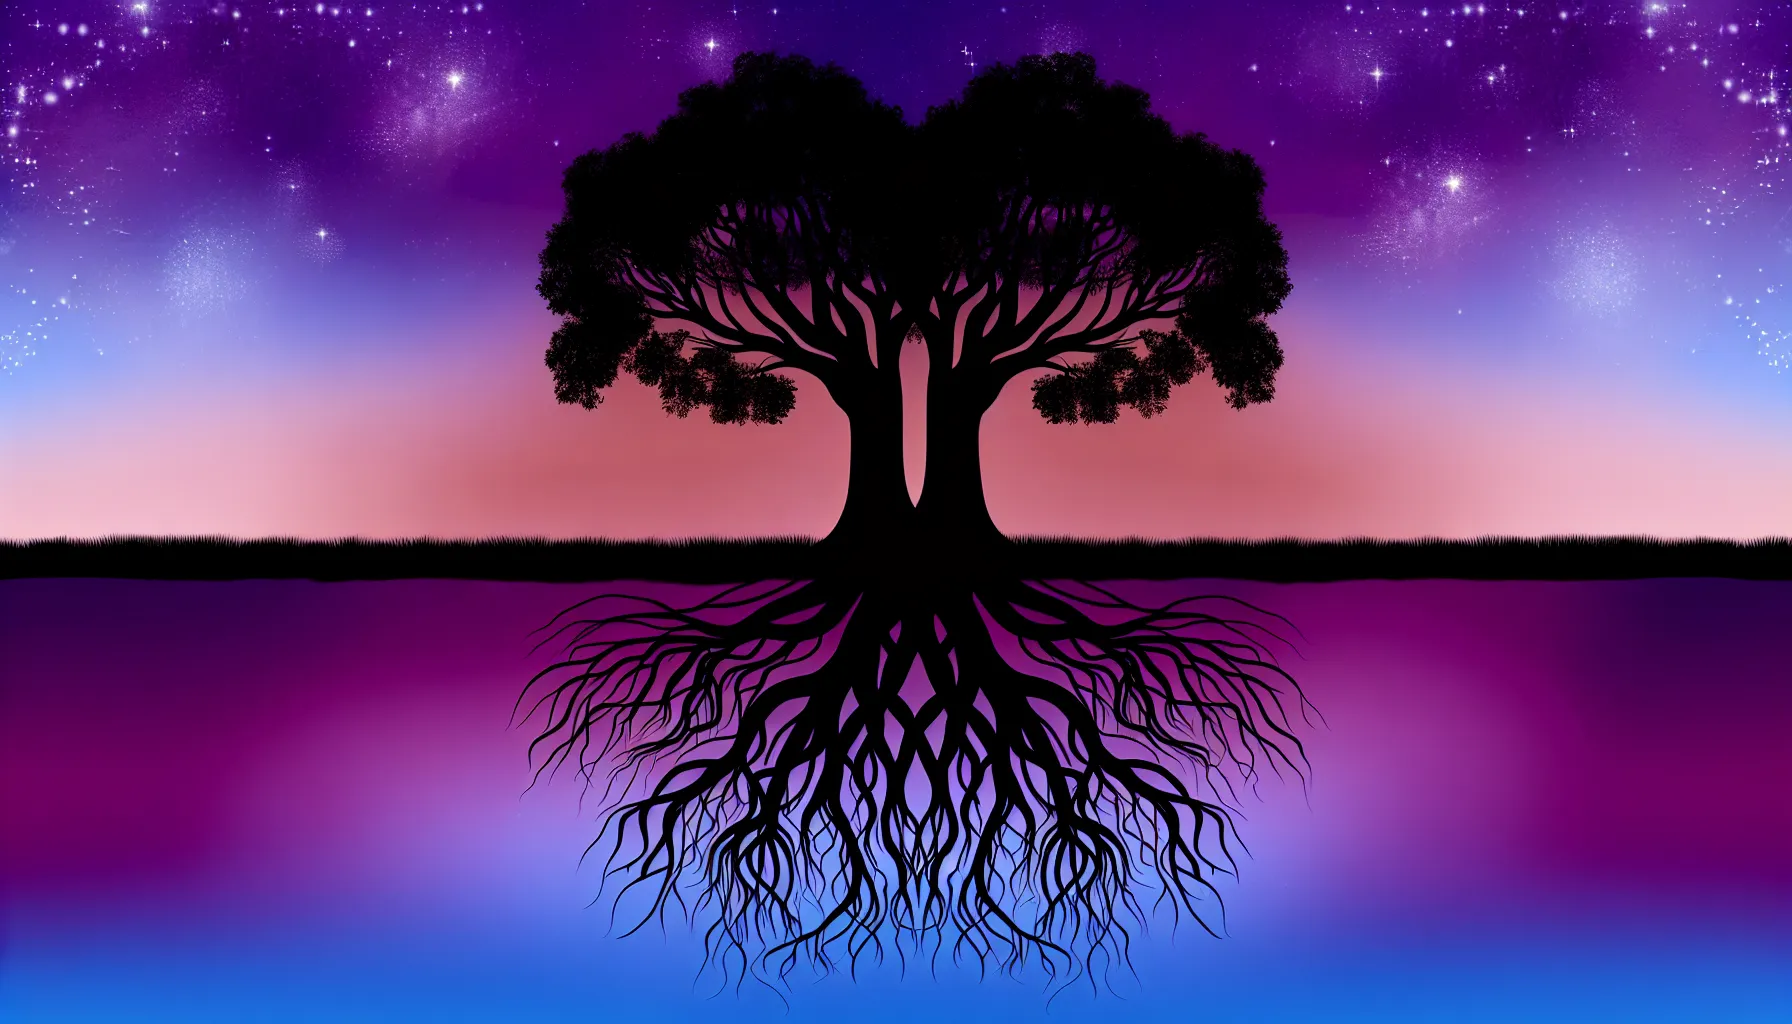 <strong>Interwoven Destinies</strong>: Like trees sharing a secret beneath the earth, a true connection lies in the entwined roots of shared values and dreams, growing ever stronger with time.